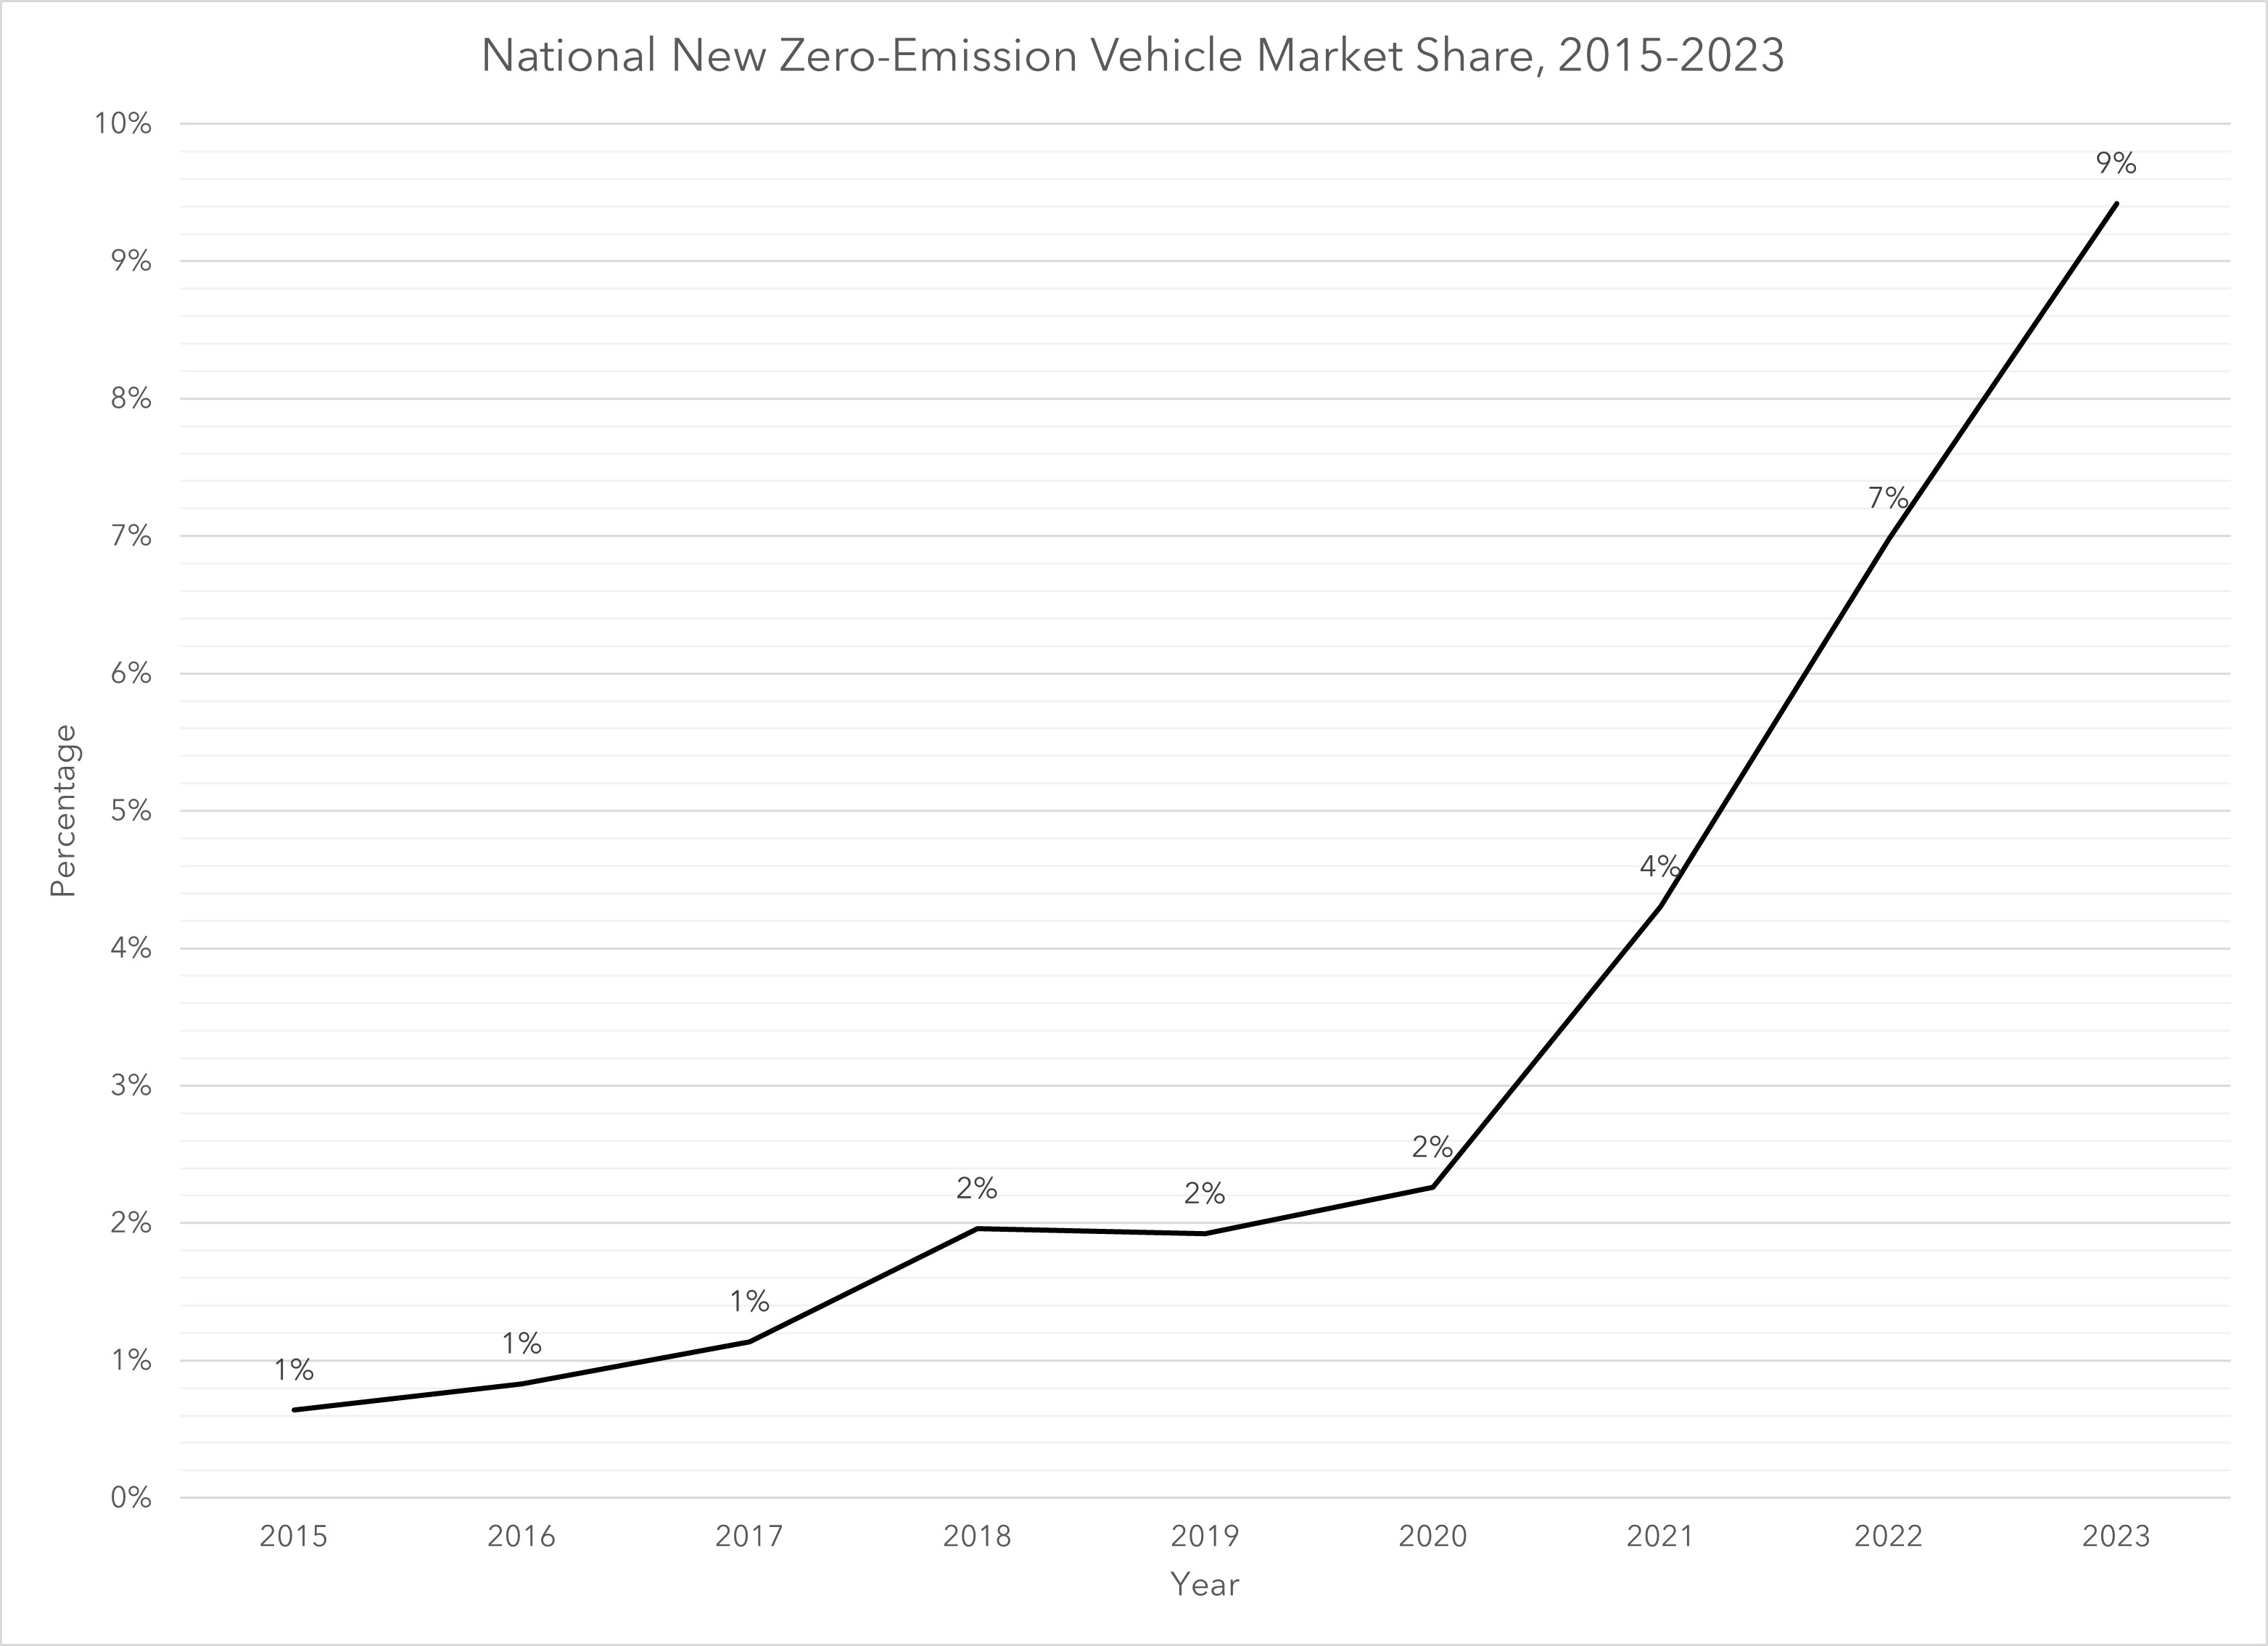 This visual displays national annual zero-emission vehicle market share from 2015 to 2023. Market share steadily increases, starting at one percent in 2015 and increasing to 9 percent in 2023.